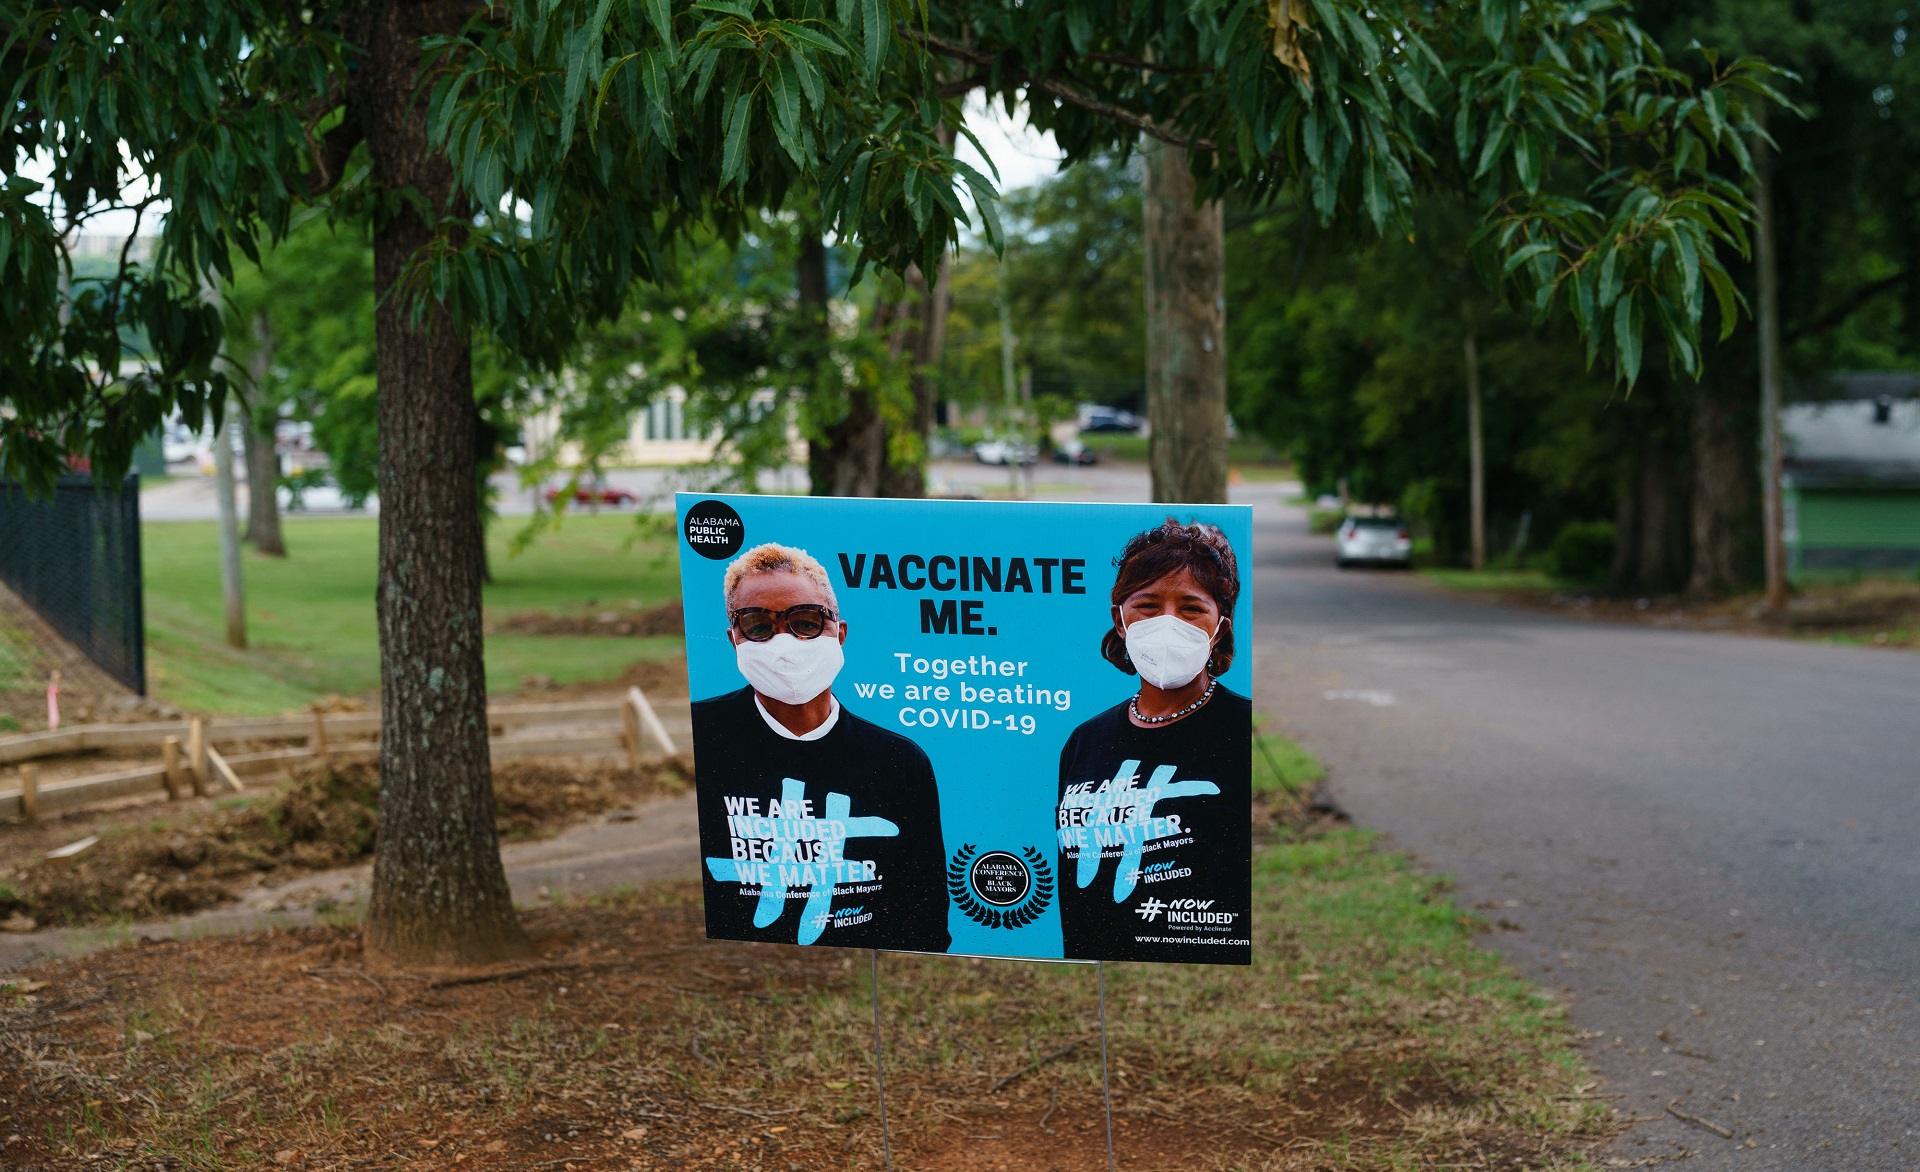 A sign encouraging COVID-19 vaccination is seen outside a park on June 30, 2021, in Birmingham, Alabama. - A black minority suspicious of vaccines in general, and conservative white rural people convinced that the vaccine is more dangerous than Covid-19: Alabama and several southern states in the United States have among the lowest vaccination rates, making this deprived region an Achilles heel in the face of the coronavirus. (Photo by Elijah Nouvelage / AFP)